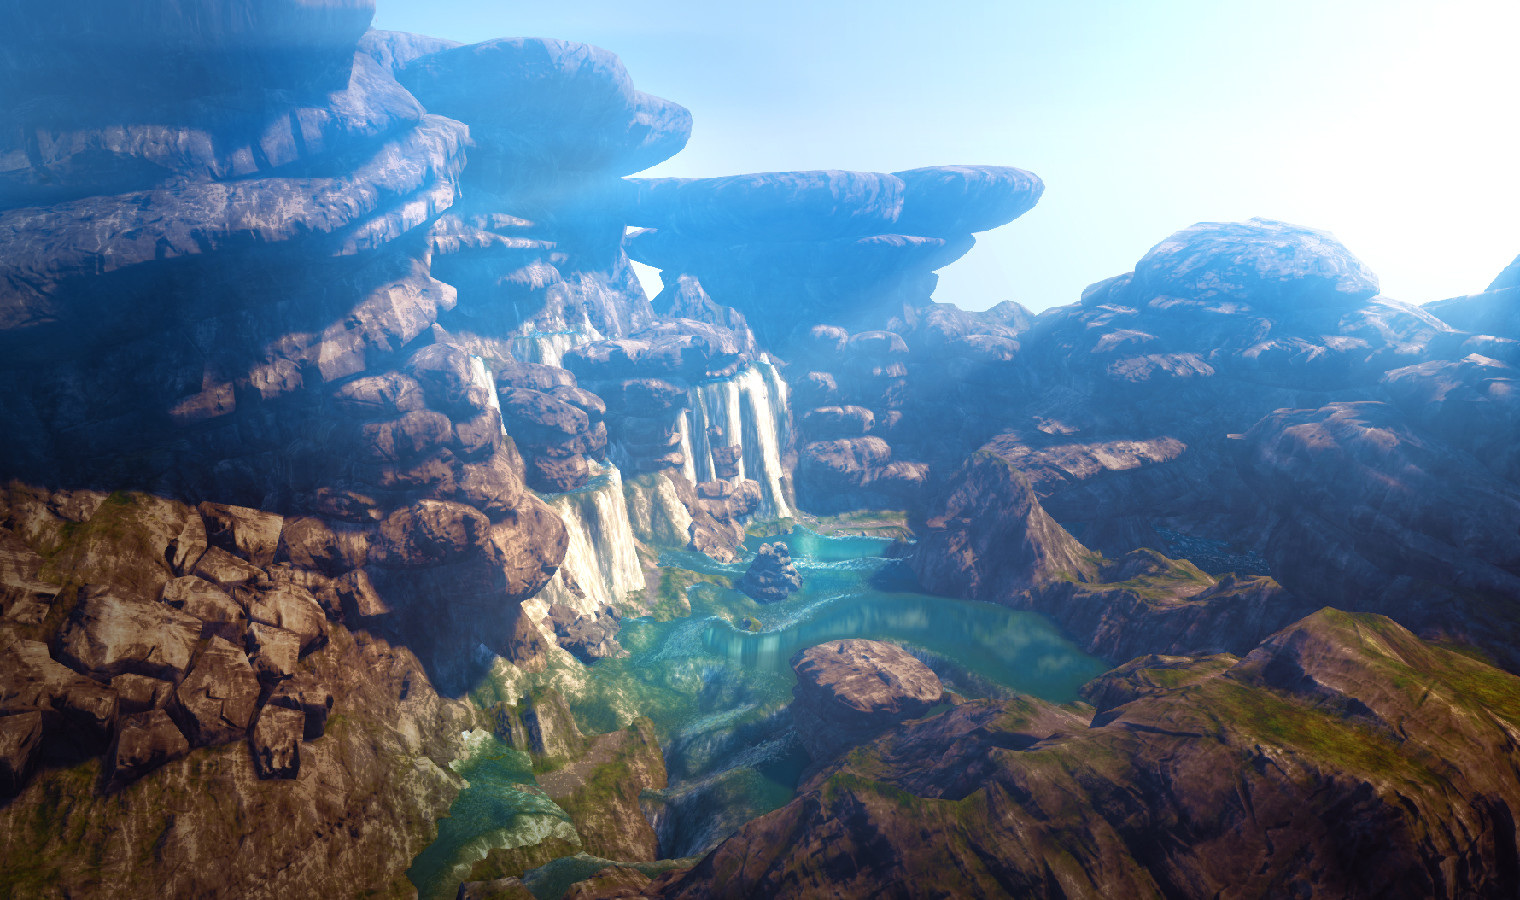 I prototyped from scratch an entirely dynamic landscape system on Unreal, this is an non doctored screen capture of it.